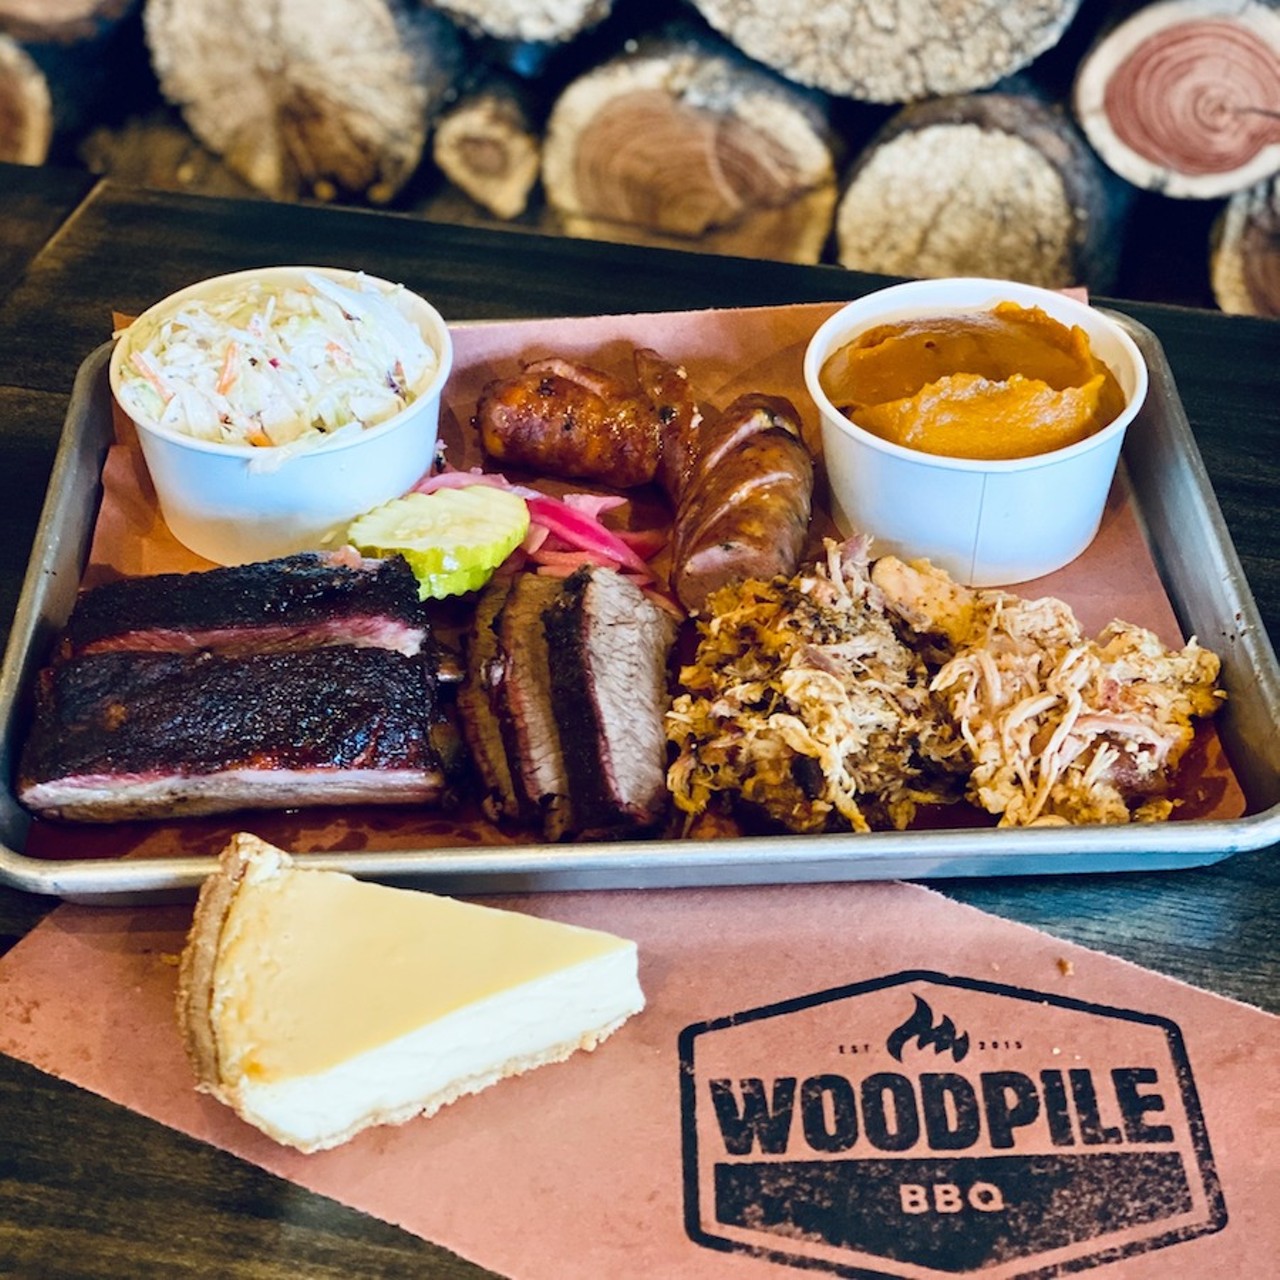 11. Woodpile BBQ 
630 E. 11 Mile Rd., Madison Heights; 248-565-8149;  woodpilebbqshack.com 
"On the first smell, I LOVED at his place. Let's just say it took me a few days to finish the huge meal I bought.  I tried the burnt ends!!! DELICIOUS!! And I think there were pickled onions on the order. Whatever that was has us fighting over it in the parking lot. Needless to say that item never made it home.  I had the platter with the pulled pork, brisket and chicken and ribs and jalapeno cheddar sausage. Lol. Everything was awesome." &#151; Keith D. on Yelp
Photo via  Woodpile BBQ Shack/Facebook</i